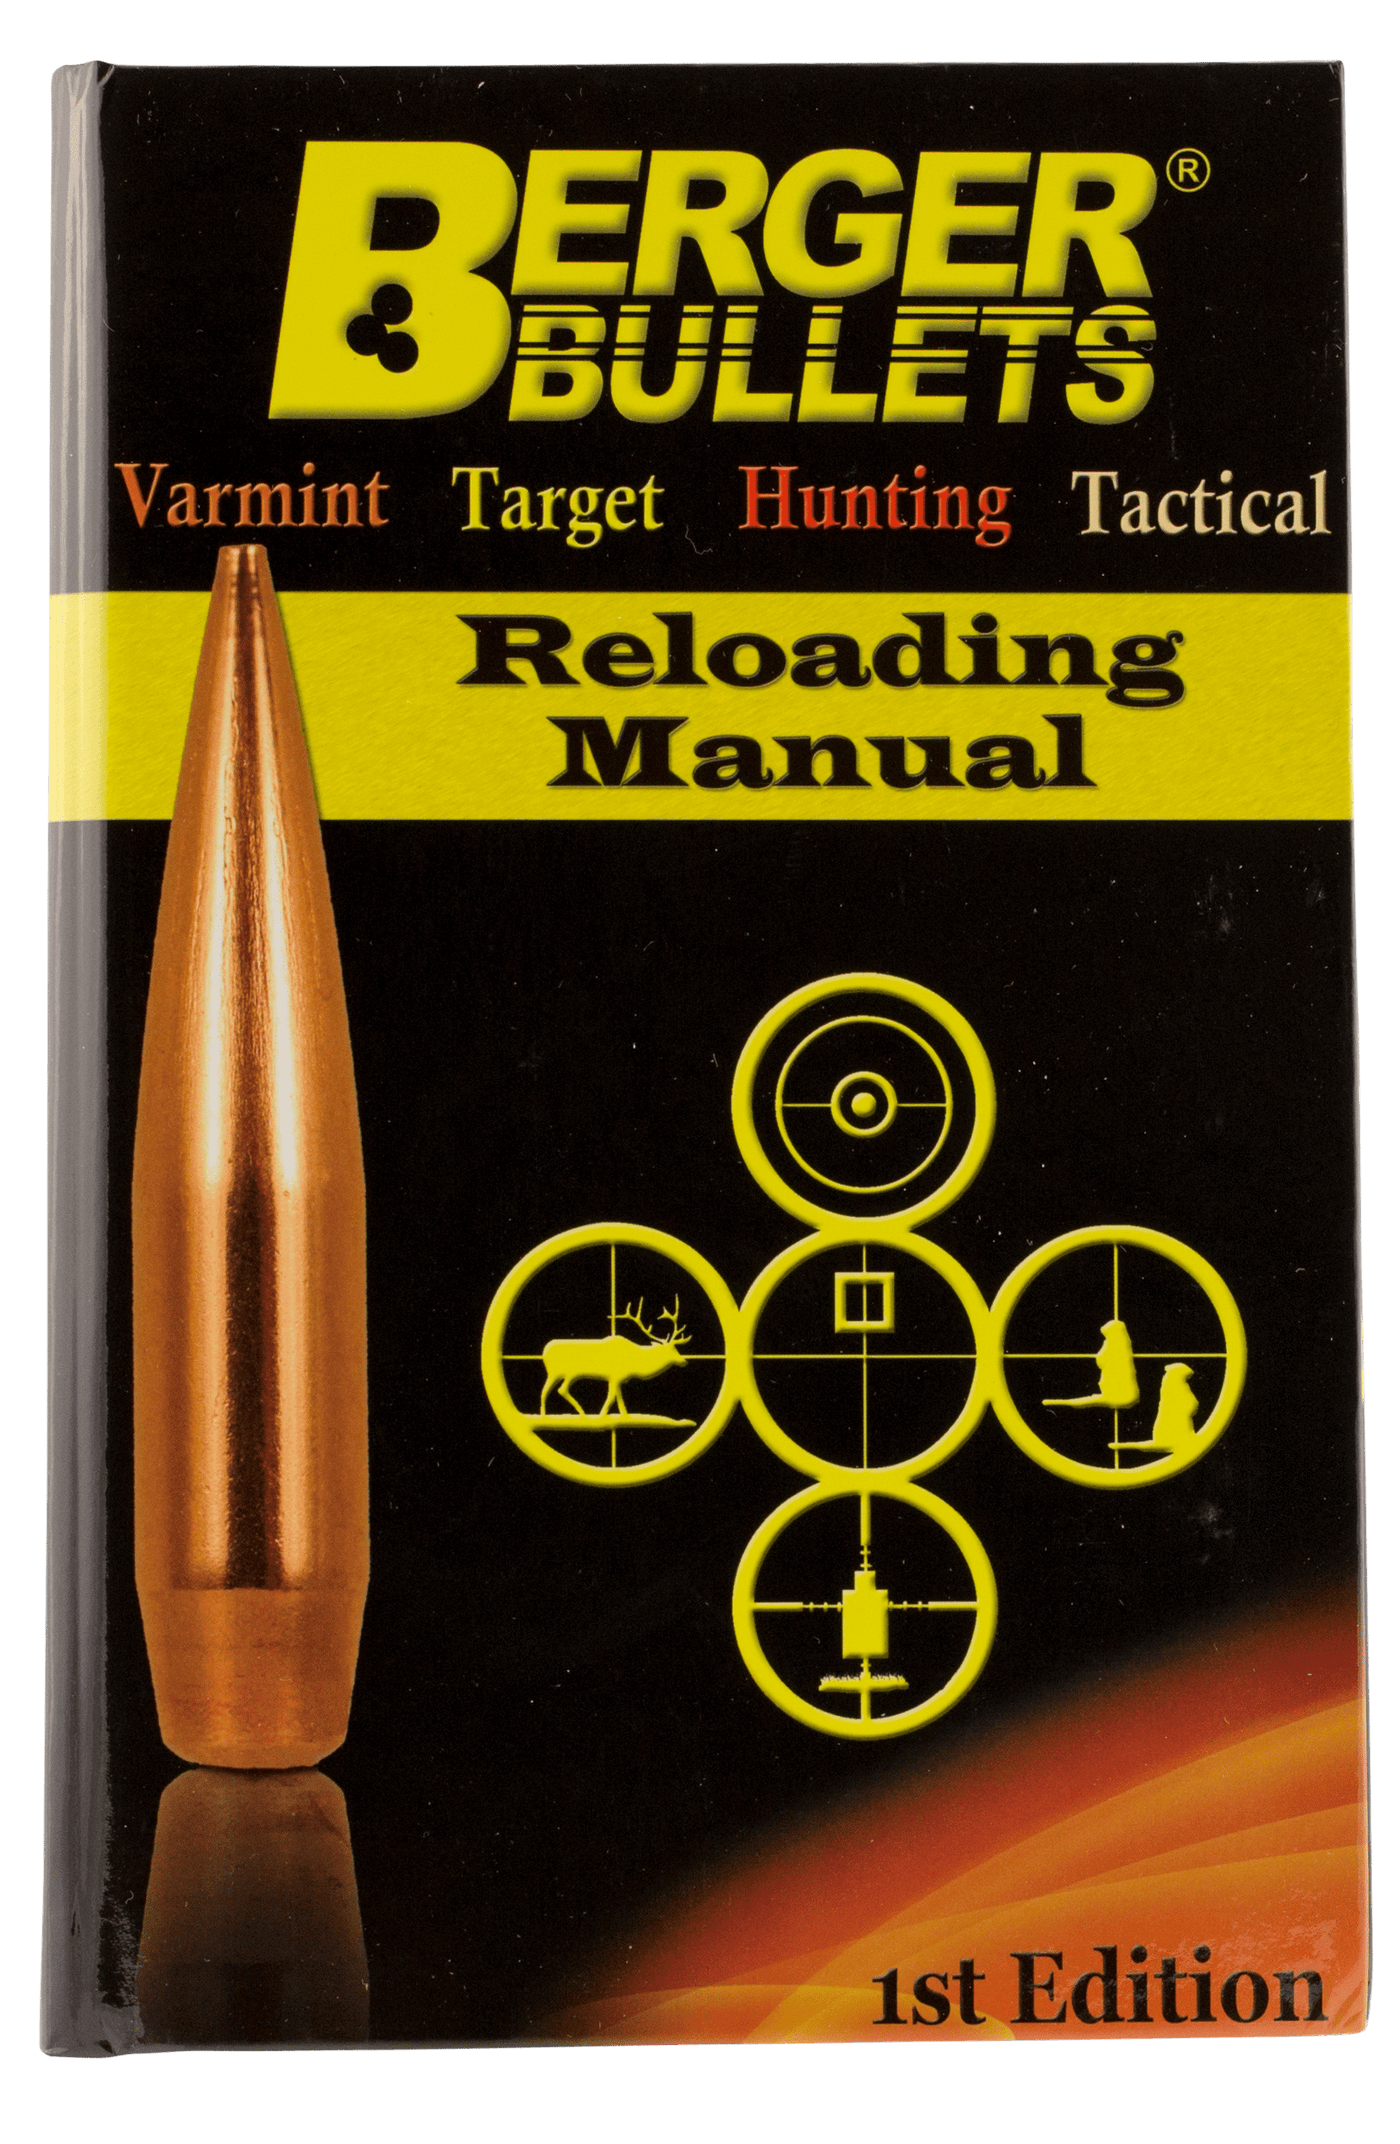 Berger Bullets Berger Bullets Reloading Manual, Berg 11111 Reloadng Manual 1st Edition Accessories